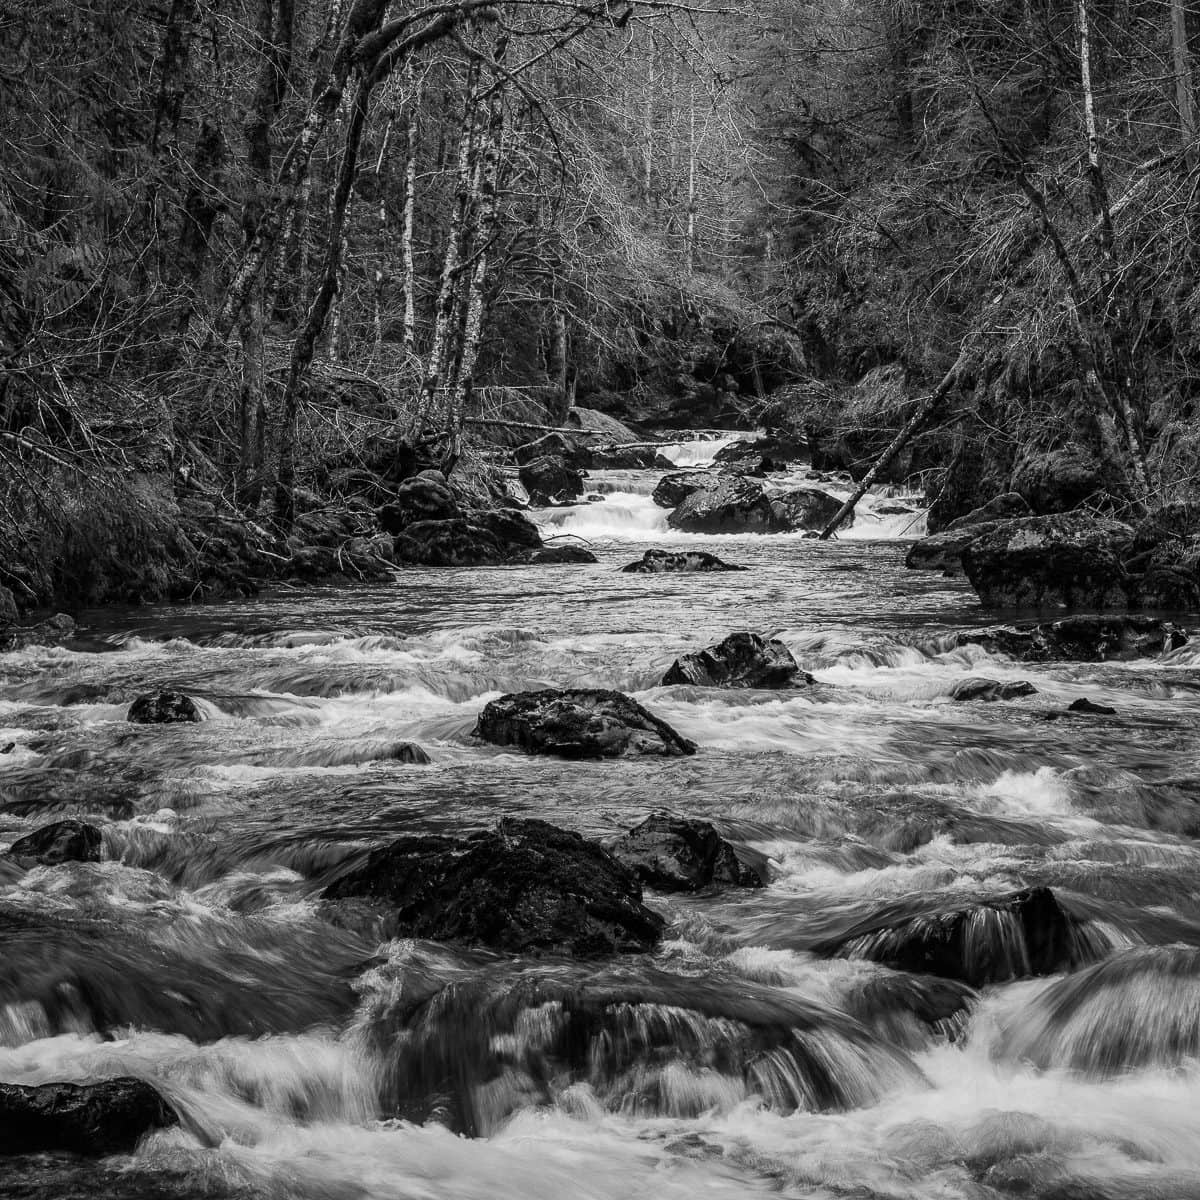 A black and white intimate landscape photograph of the Hamma Hamma River in the Olympic National Forest, Washington.